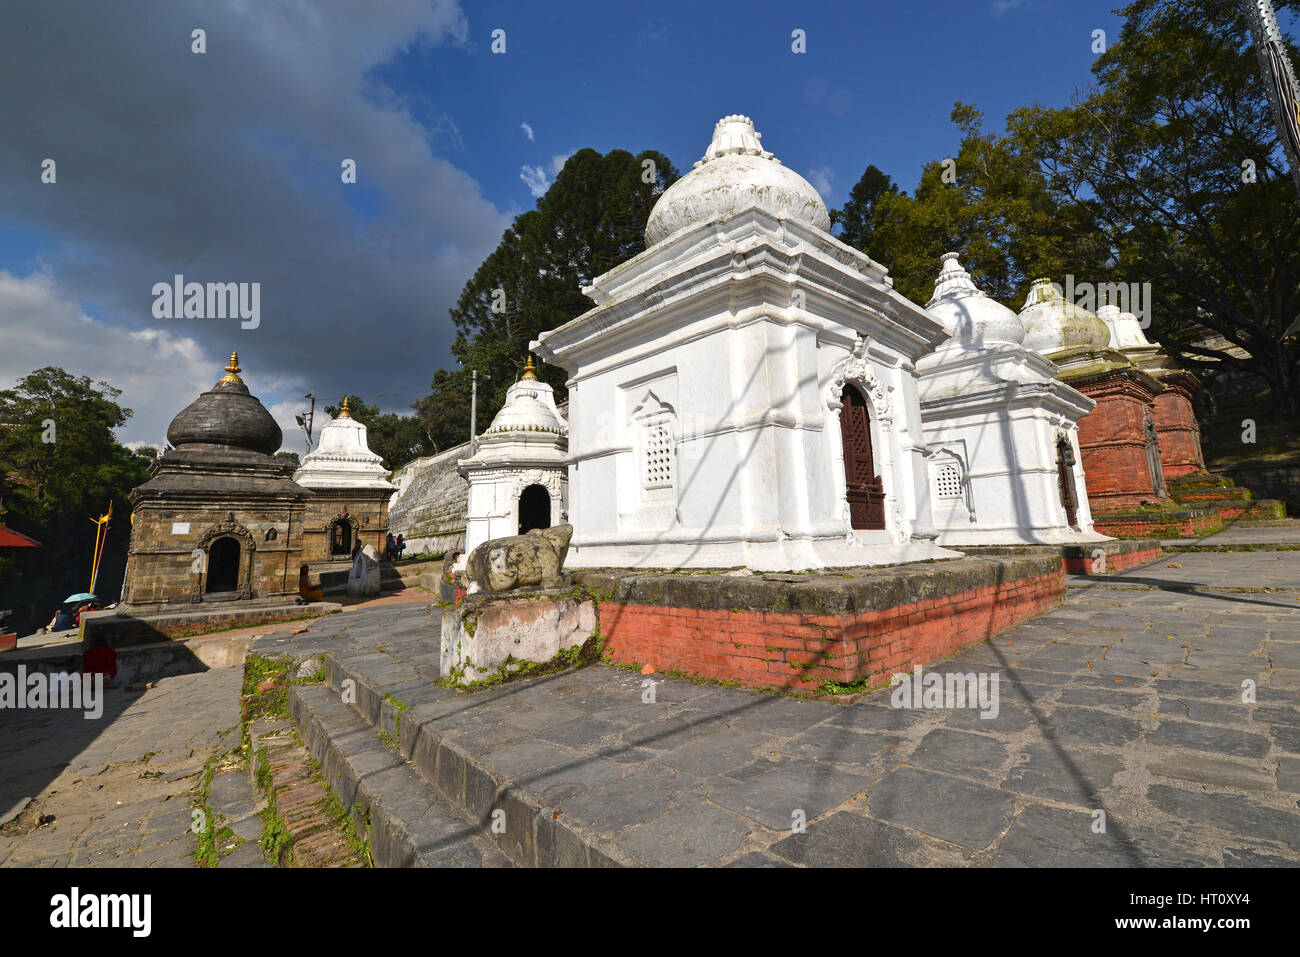 PASHUPATINATH - OCTOBER 10: Ancient Hindu temple, now collapsed after the earthquake that hit Nepal on April 25, 2015. On October 10, 2013 in Pashupat Stock Photo